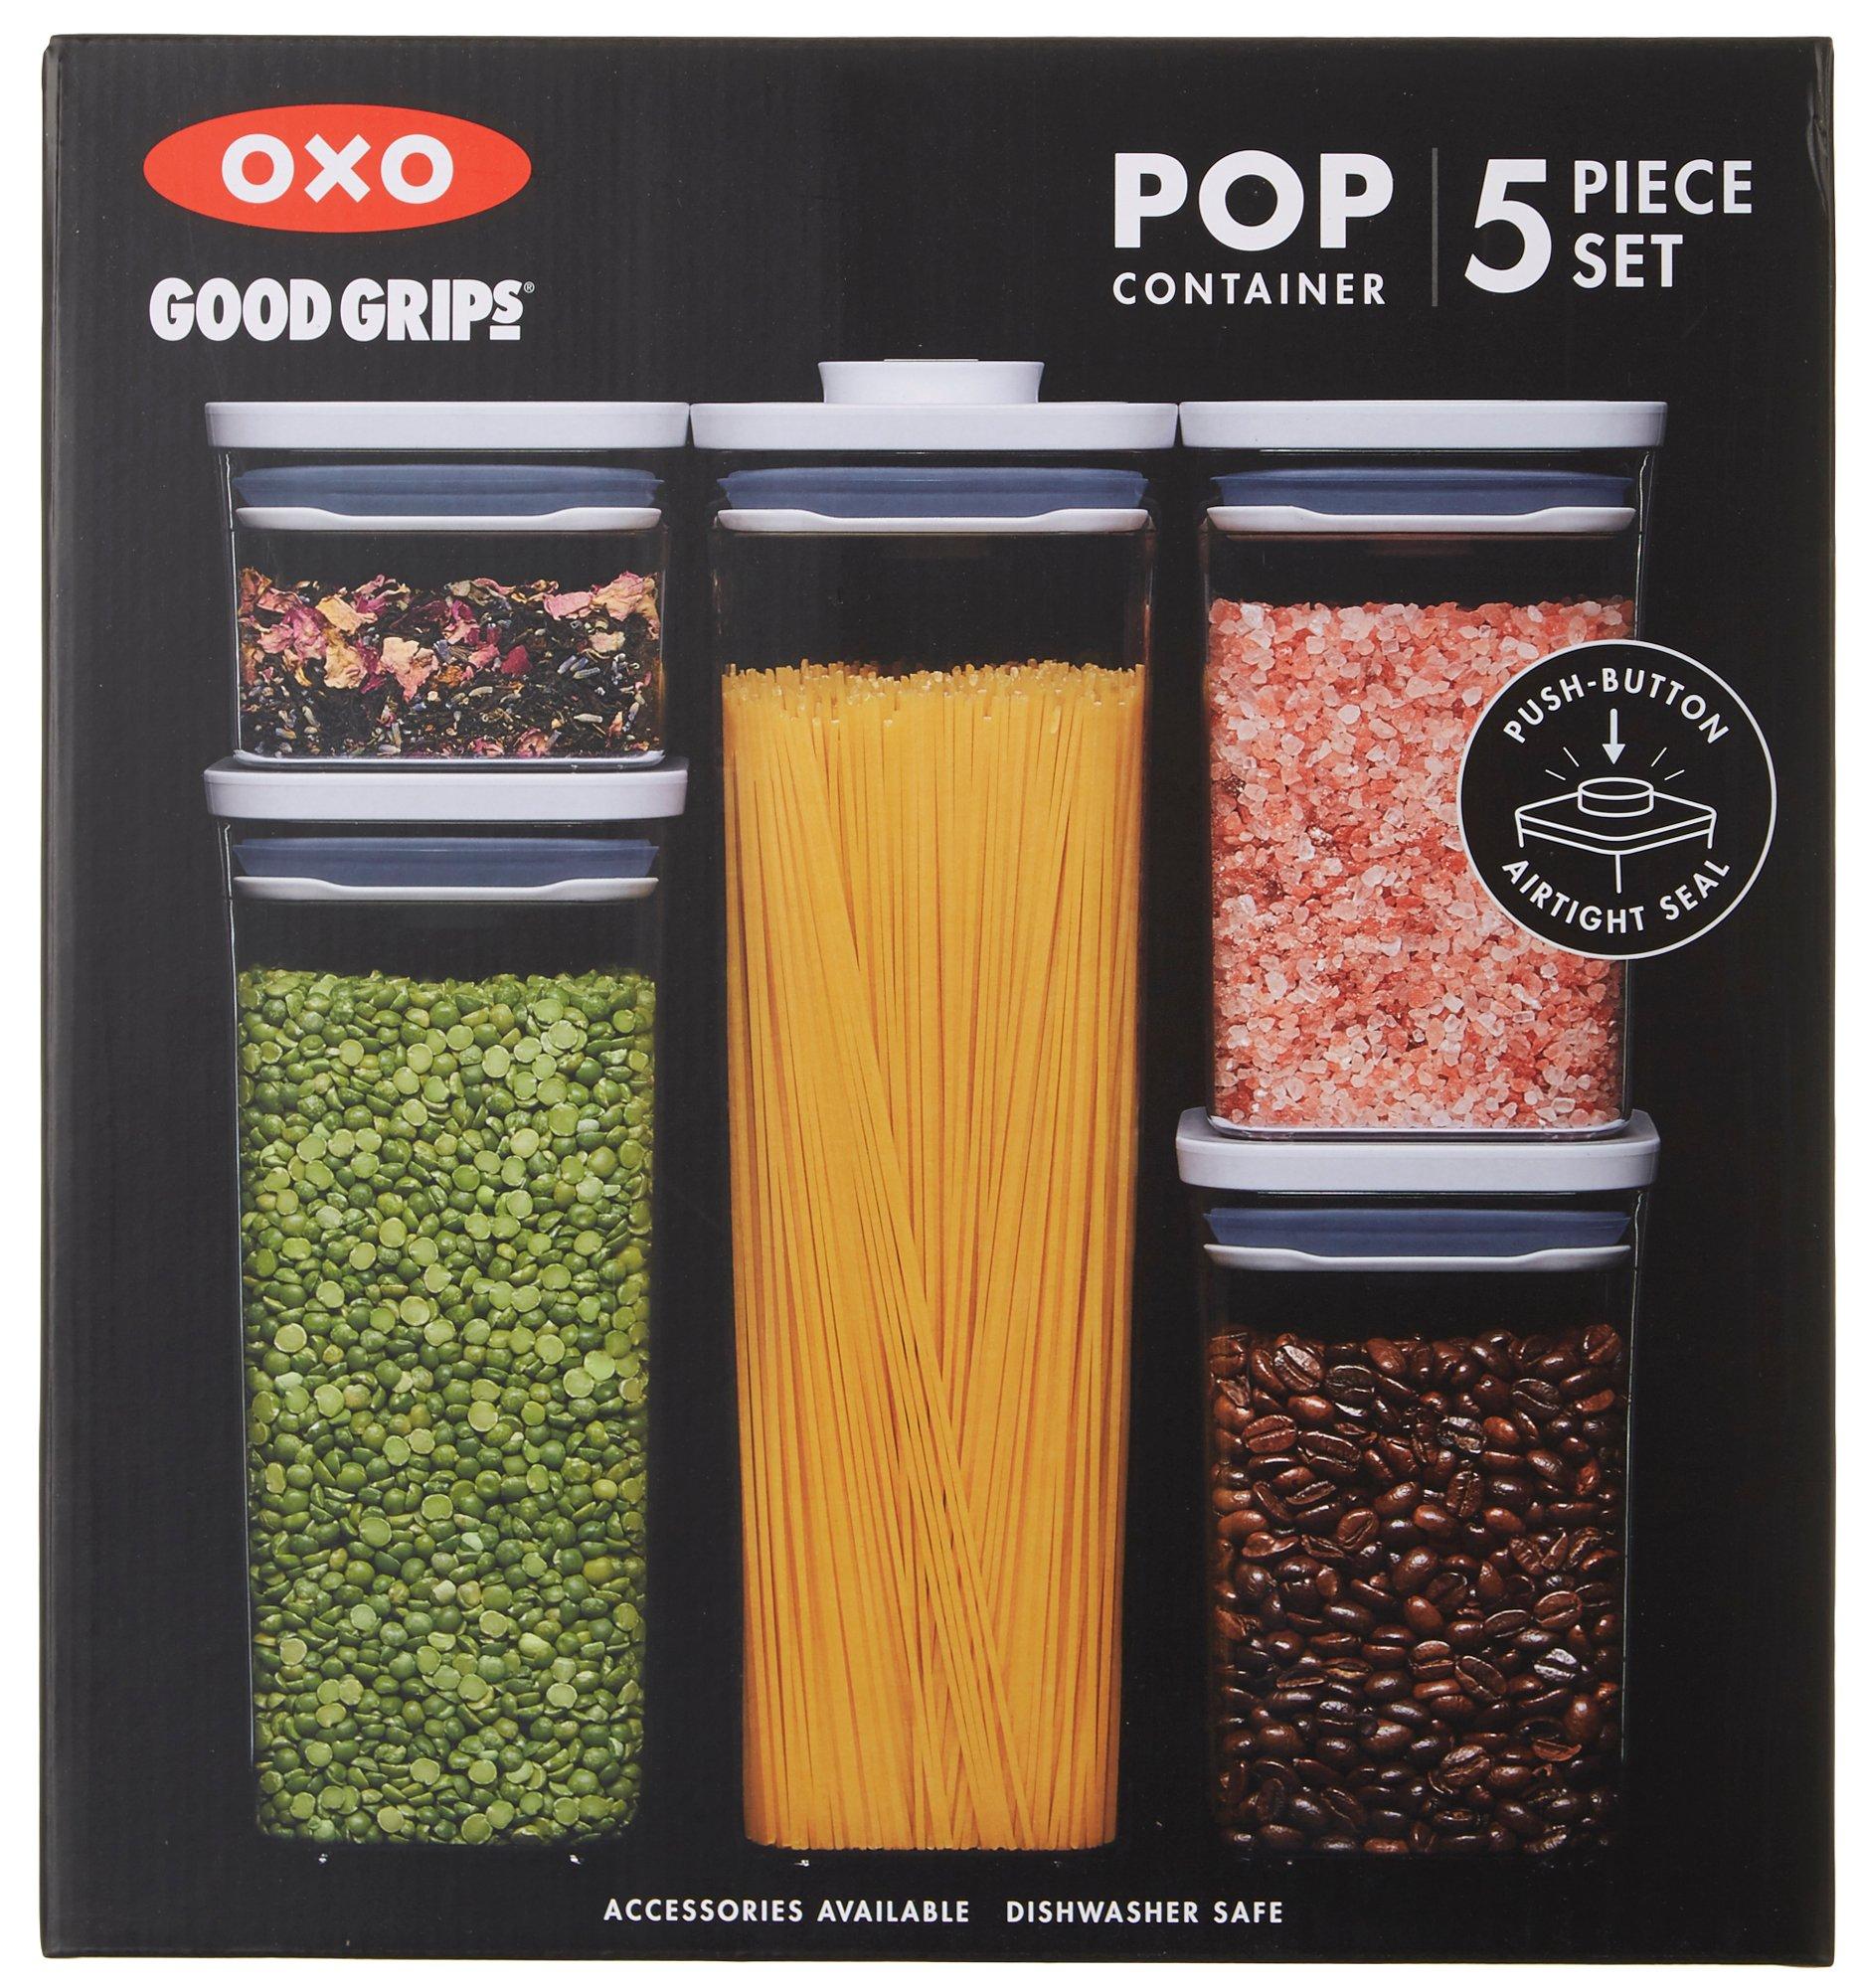 Photos - Clothes Drawer Organiser Oxo Good Grips 5-pc. Pop Container Set 